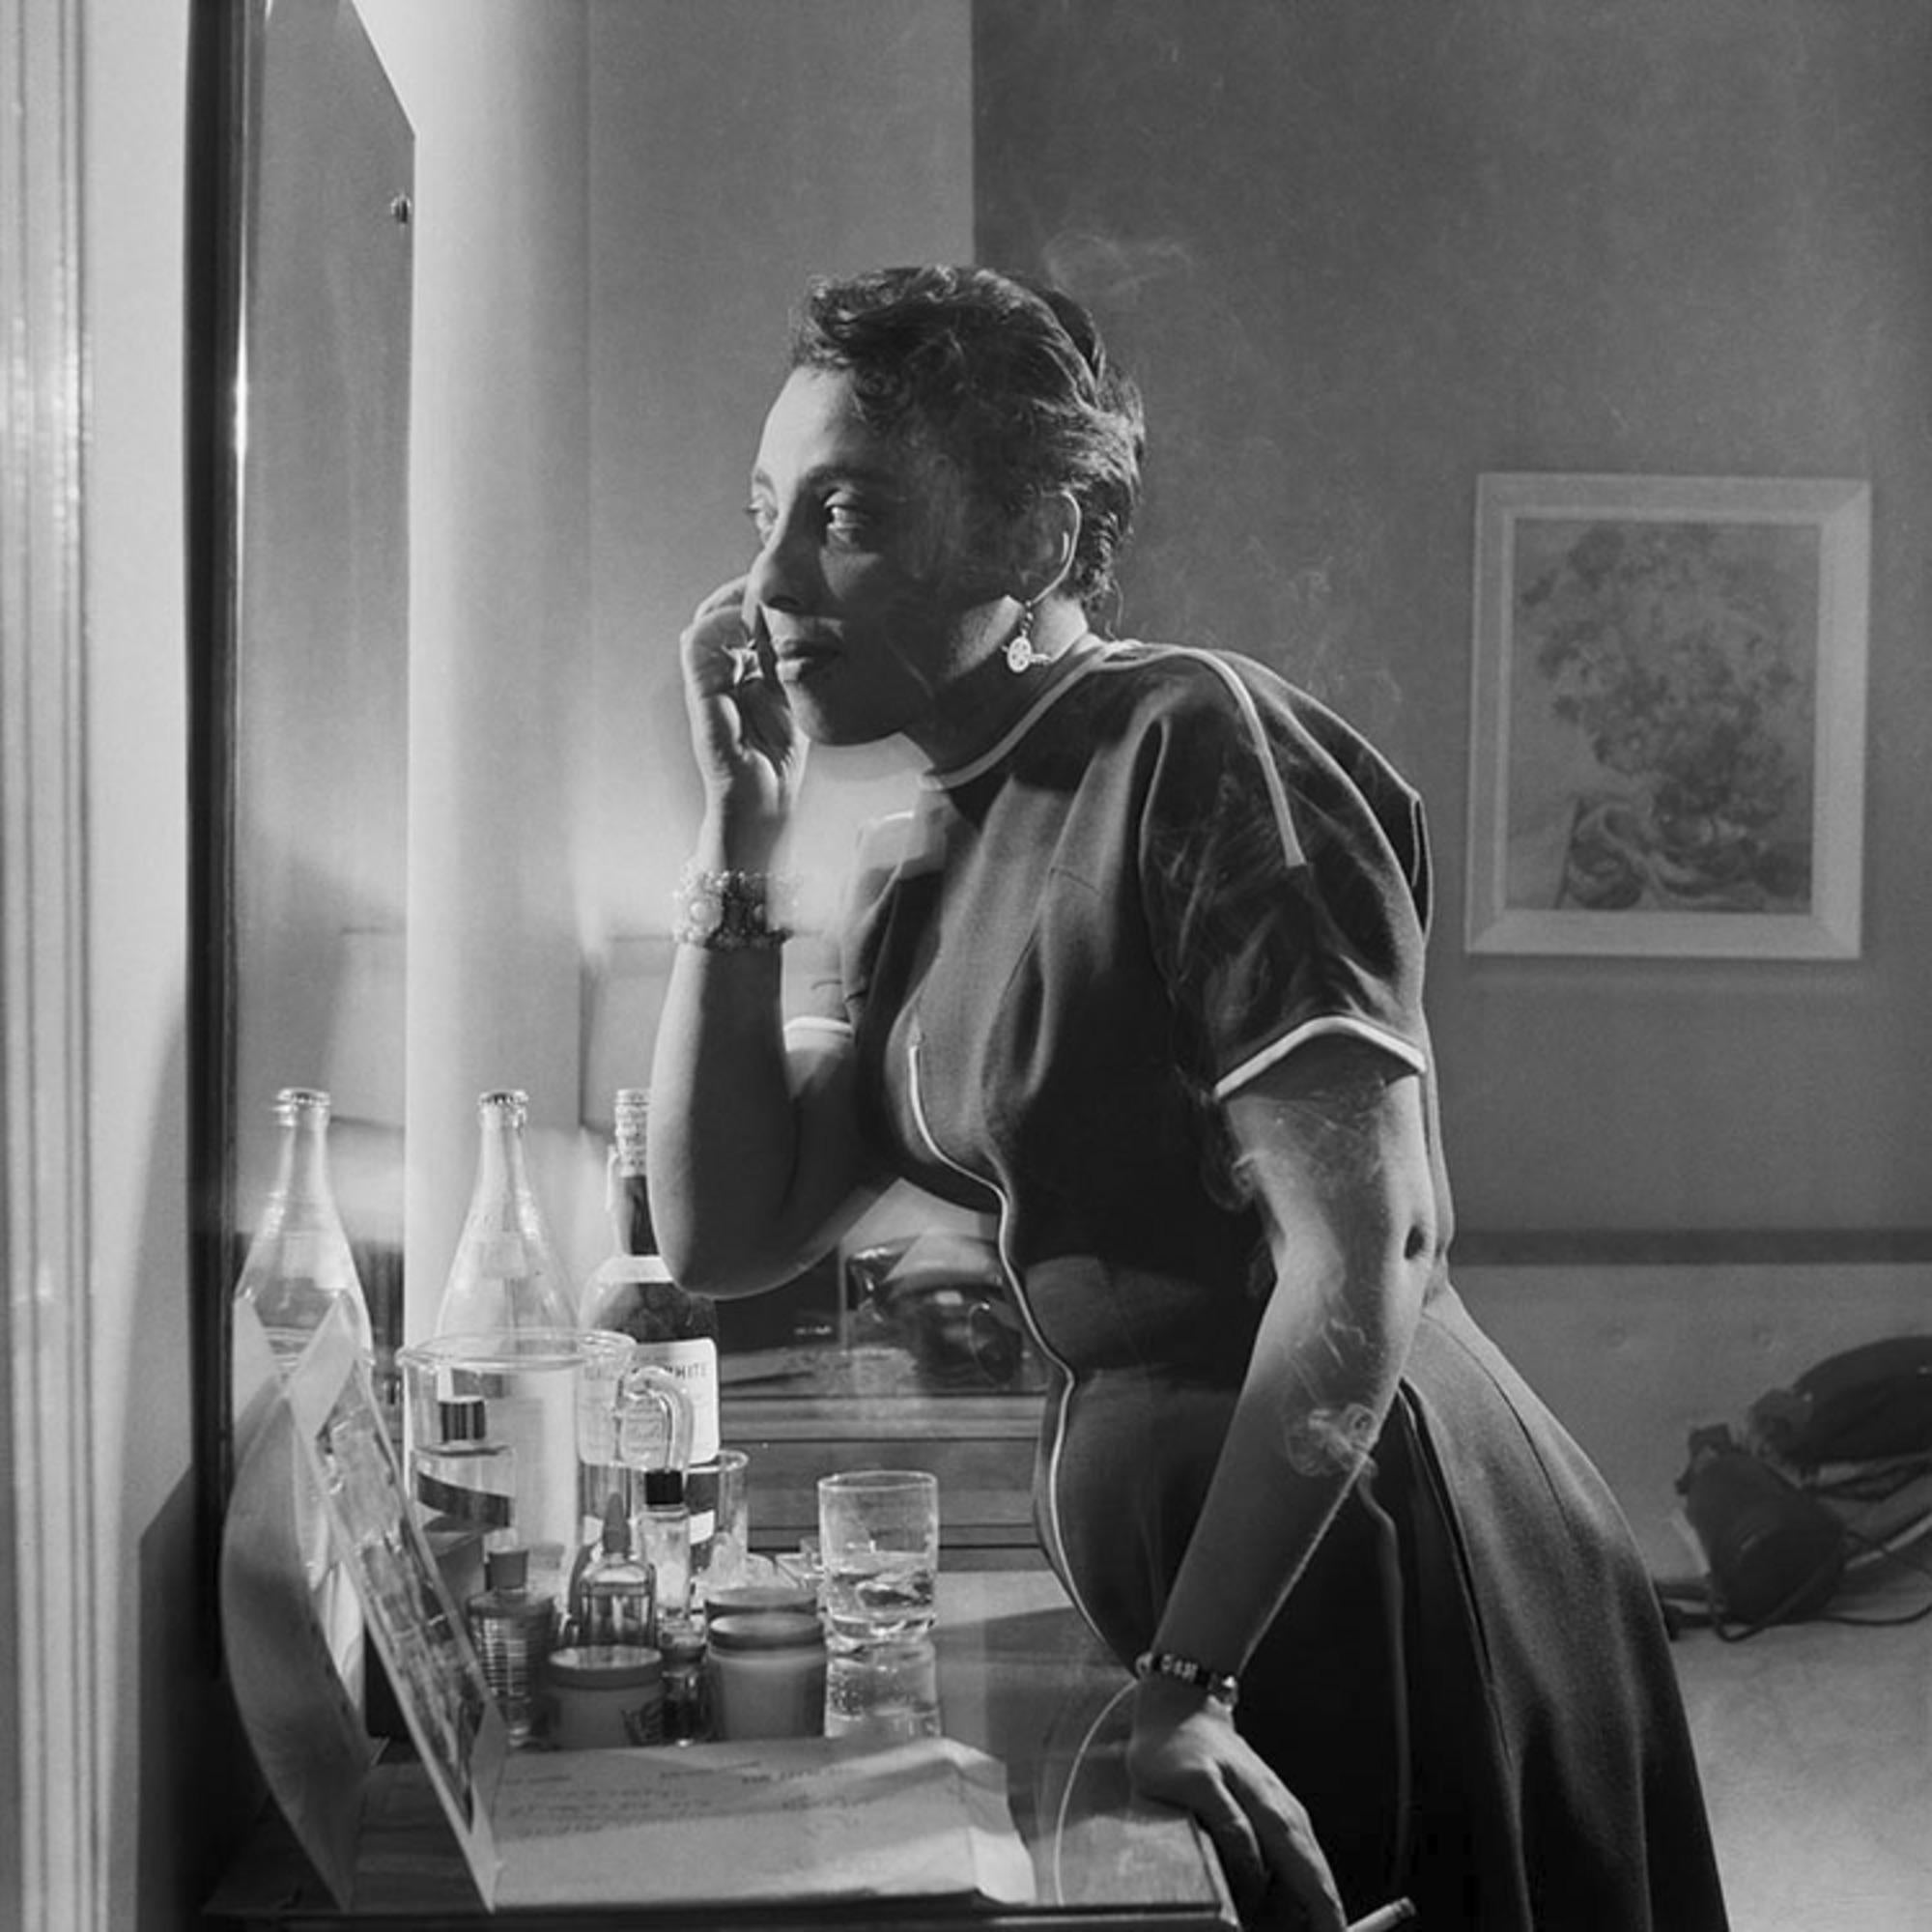 Estate-stamped, gelatin-print silver

American jazz singer Carmen McRae smoking and applying make-up in her Chicago Hotel Room, 1956.

Available sizes: 
16”x20" Edition of 25
20”x24" Edition of 25
30”x40" Edition of 25
40”x60” Edition of 25

This